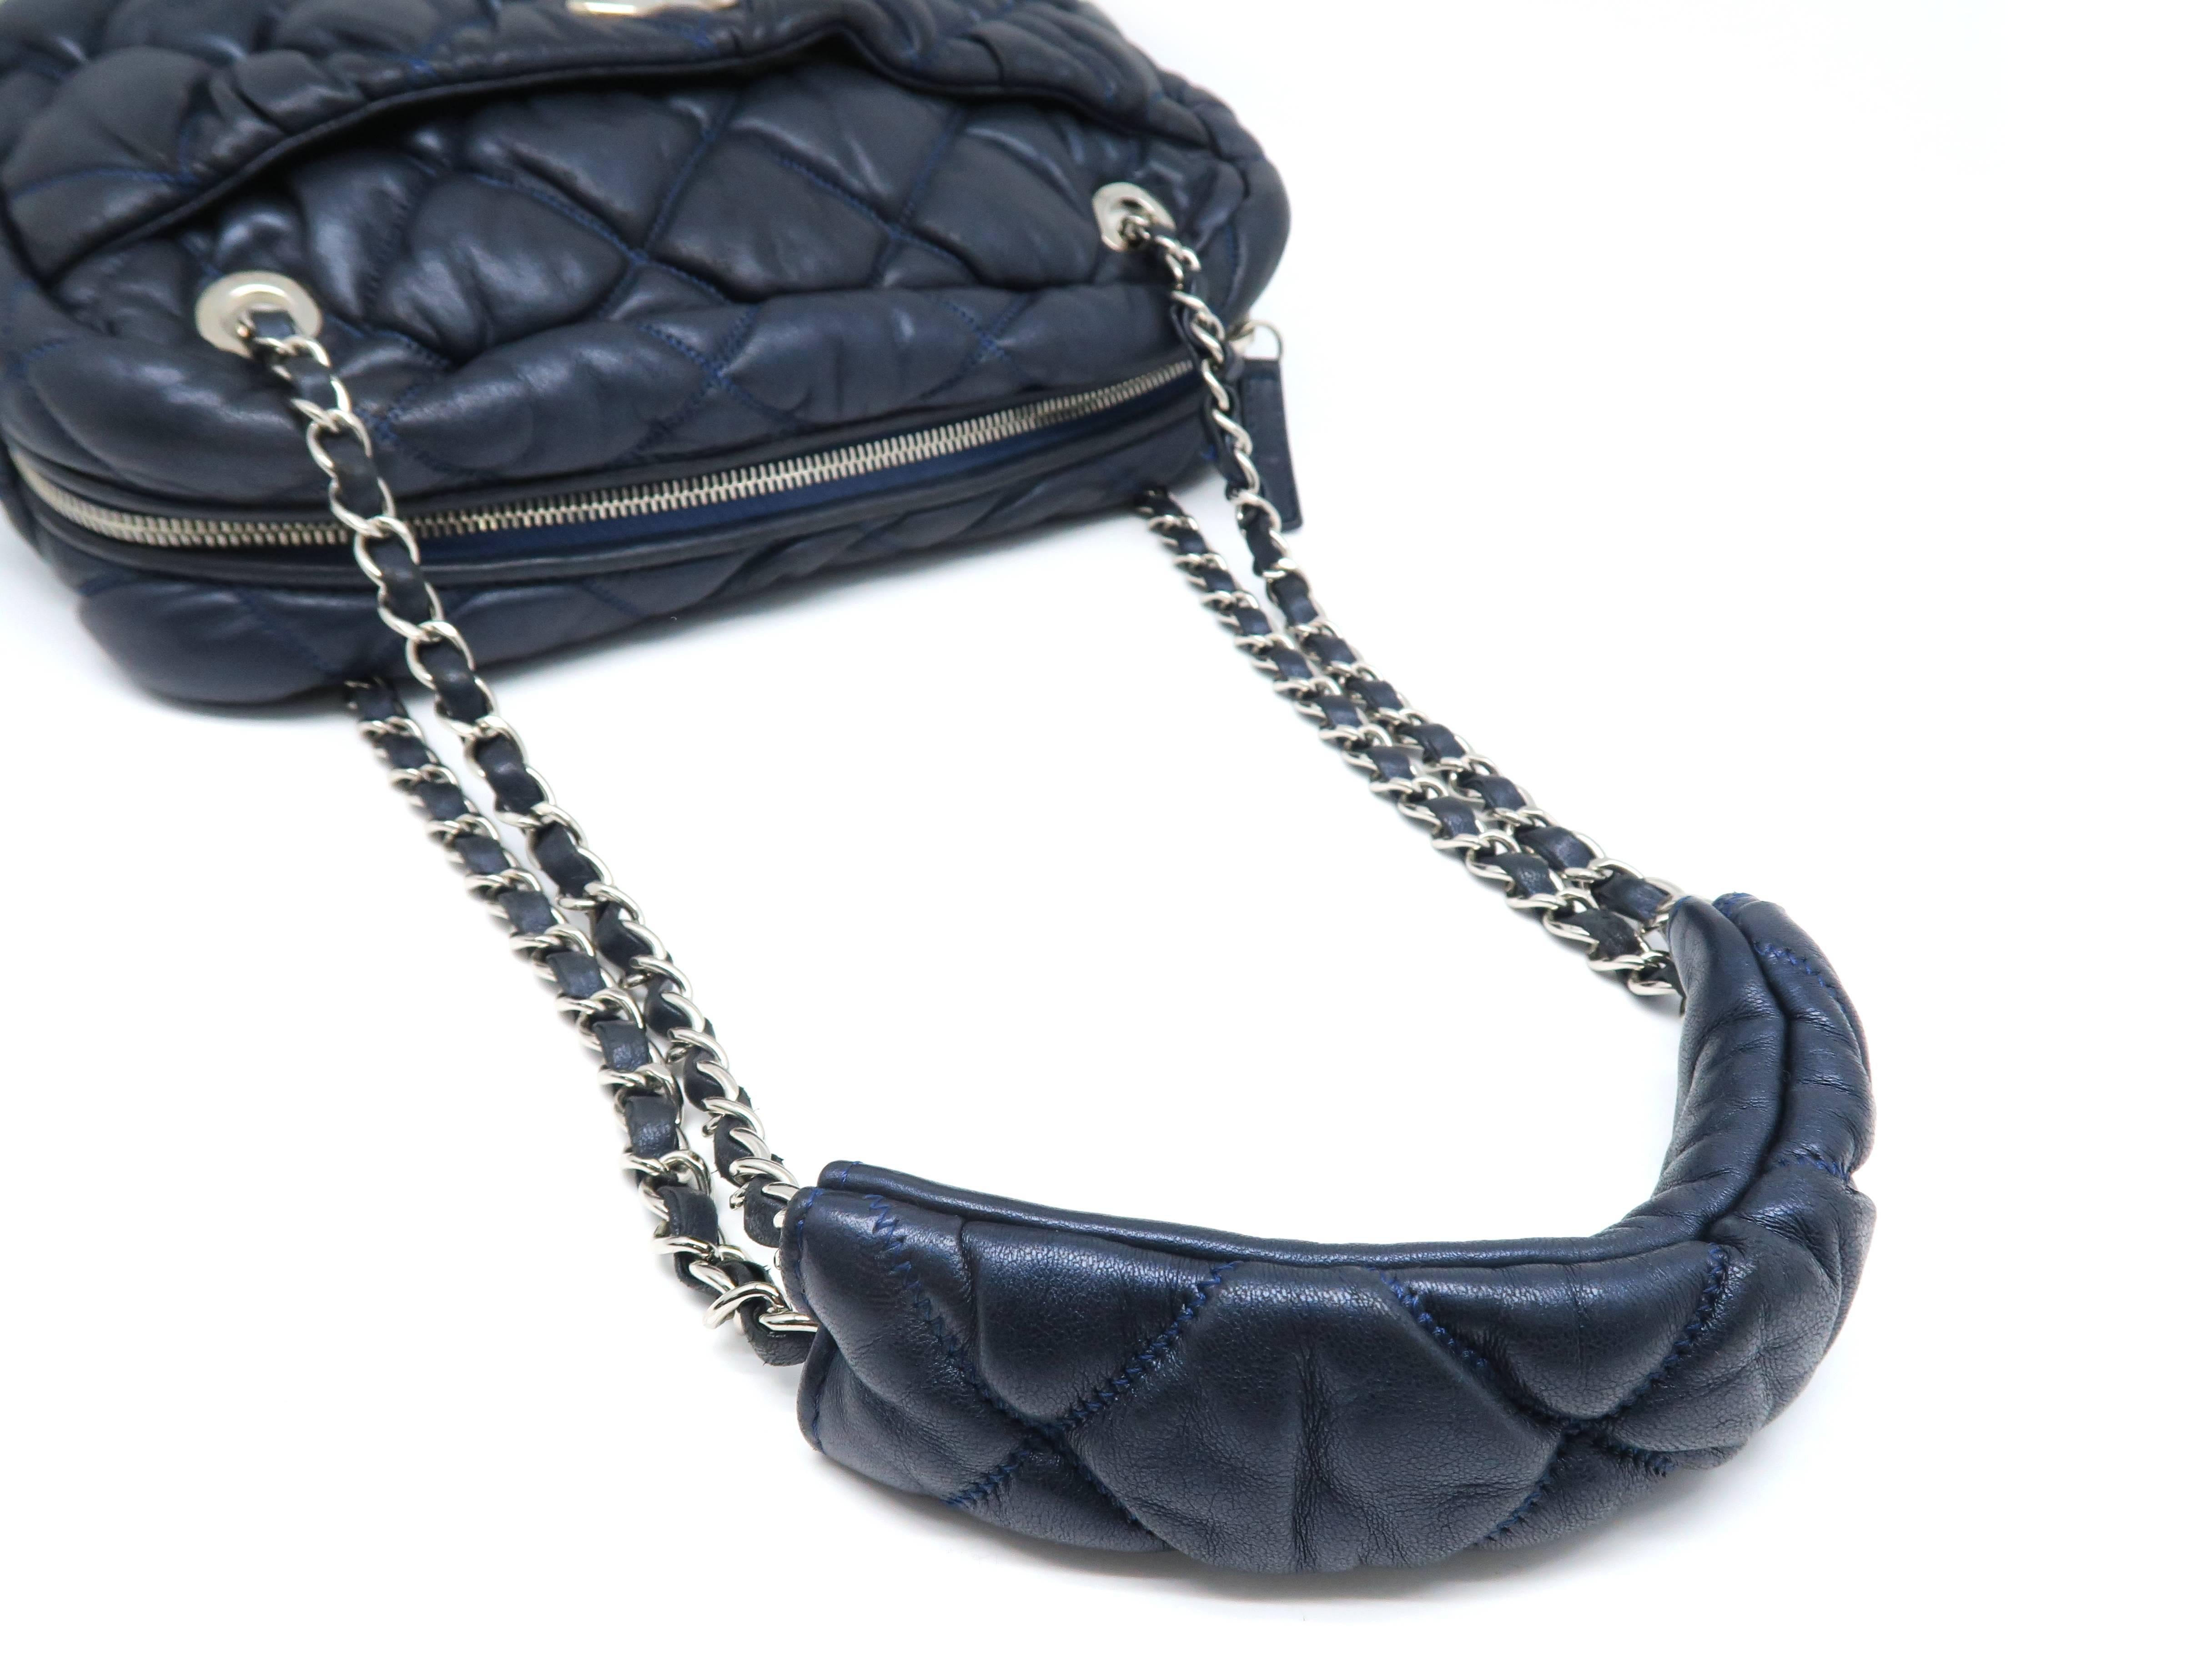 Chanel Dark Blue Quilting Lambskin Leather Chain Shoulder Bag For Sale 4